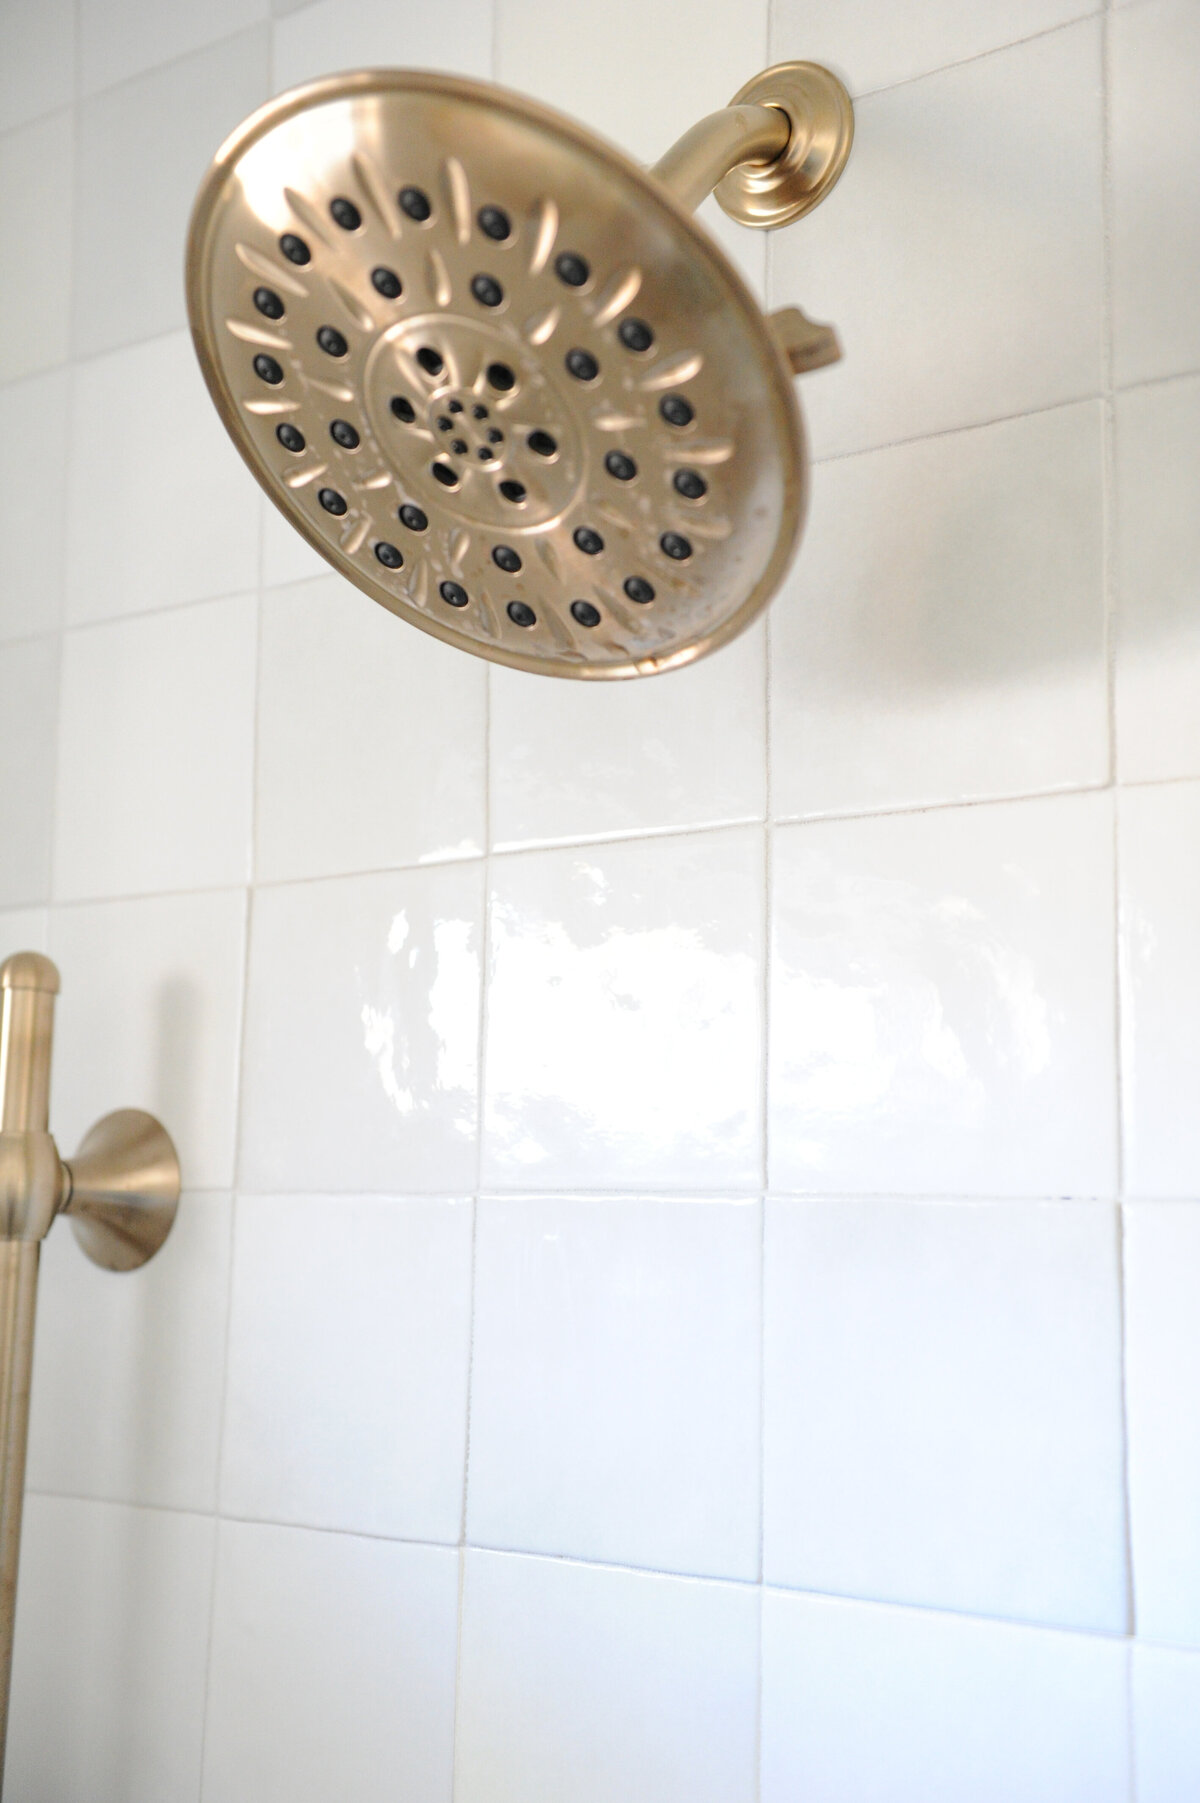 Gold shower head mounted to tiled shower wall